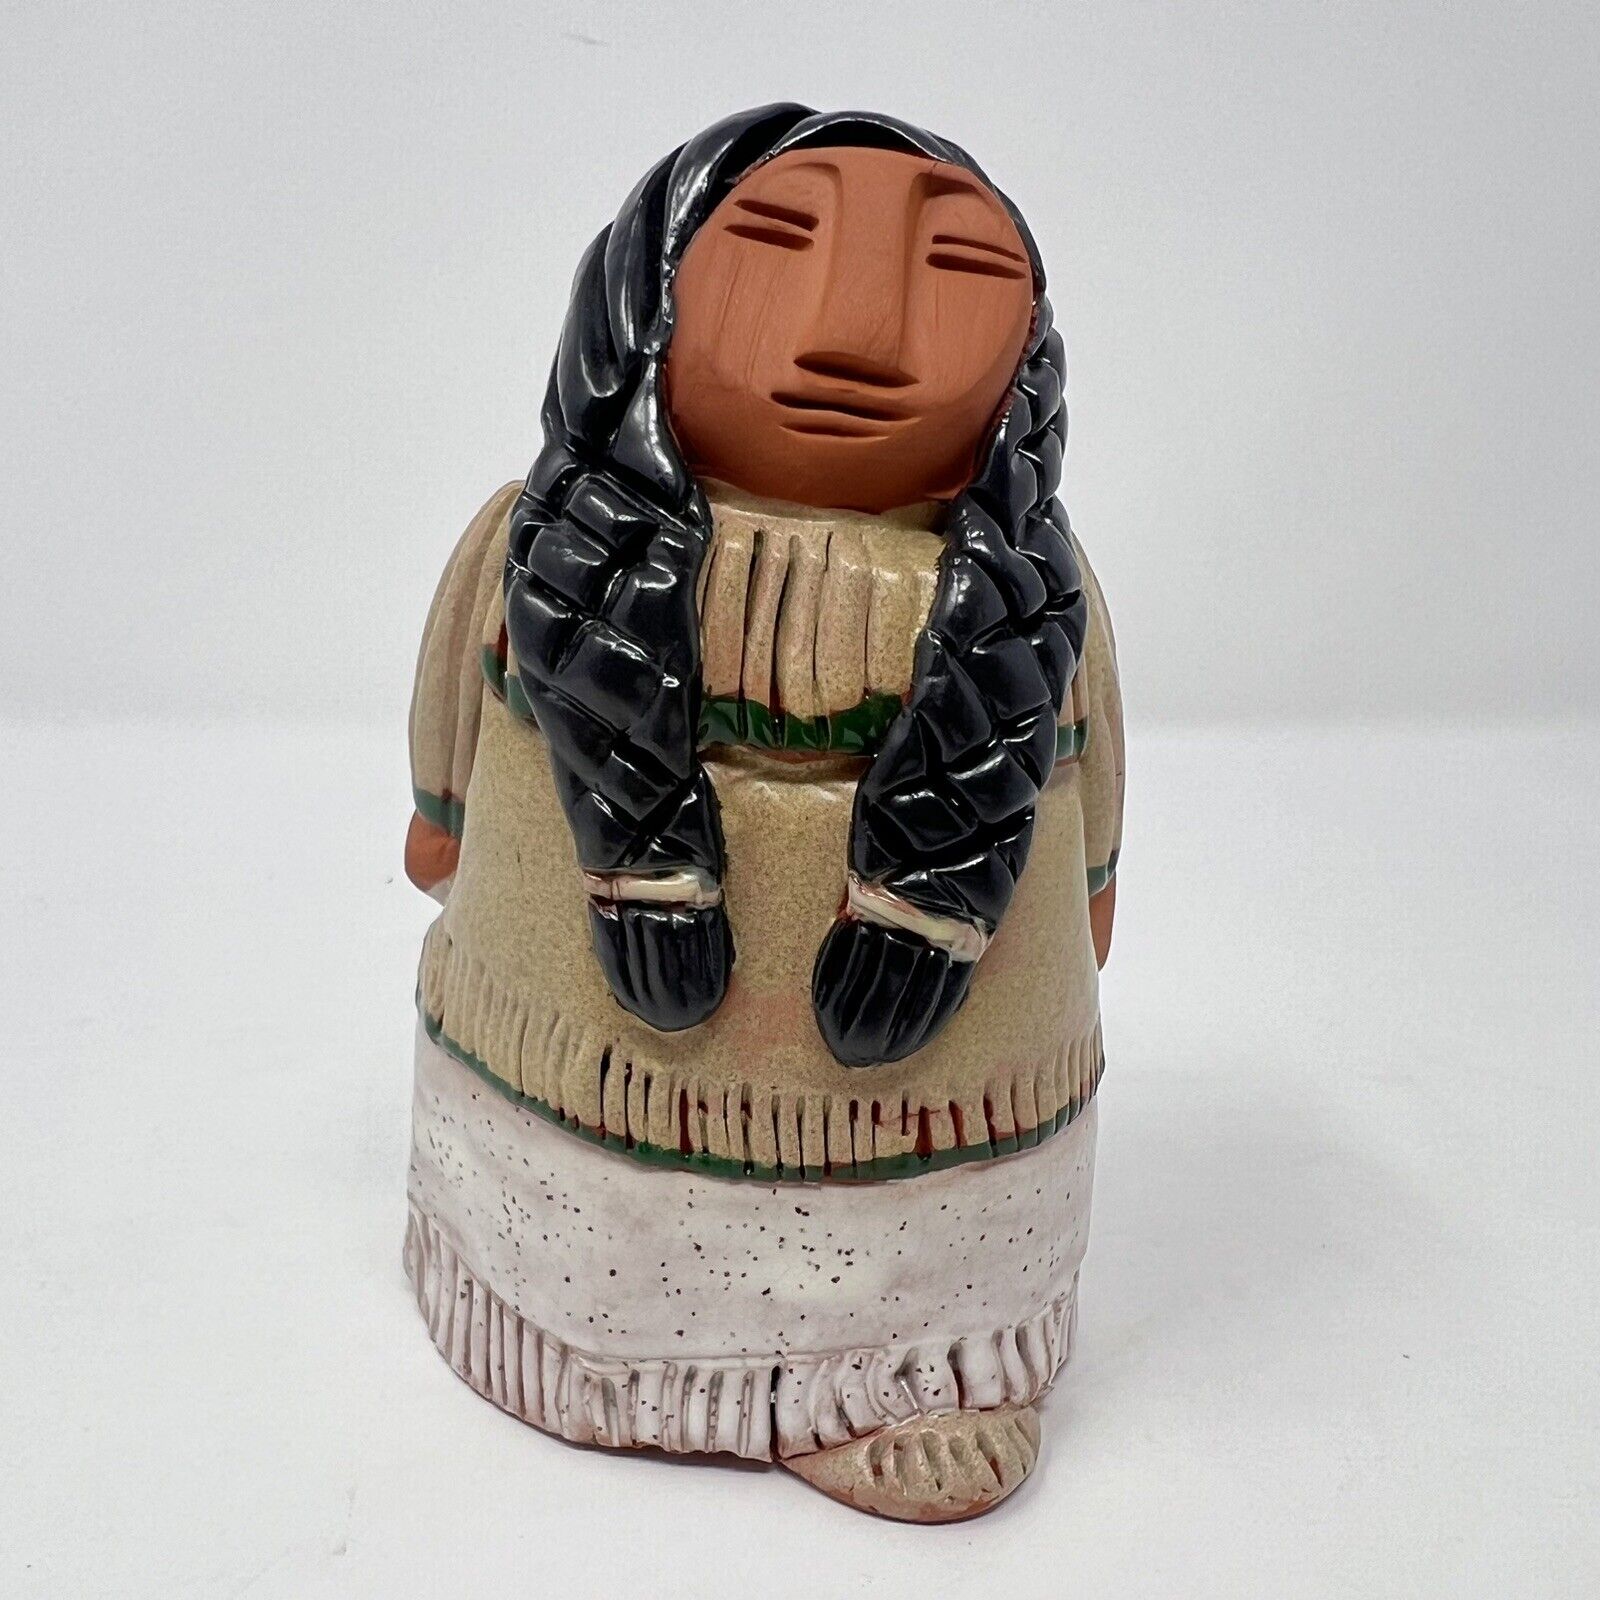 Keena Signed Mohawk Native American Indian Clay Figurine 4” Mother with Braids